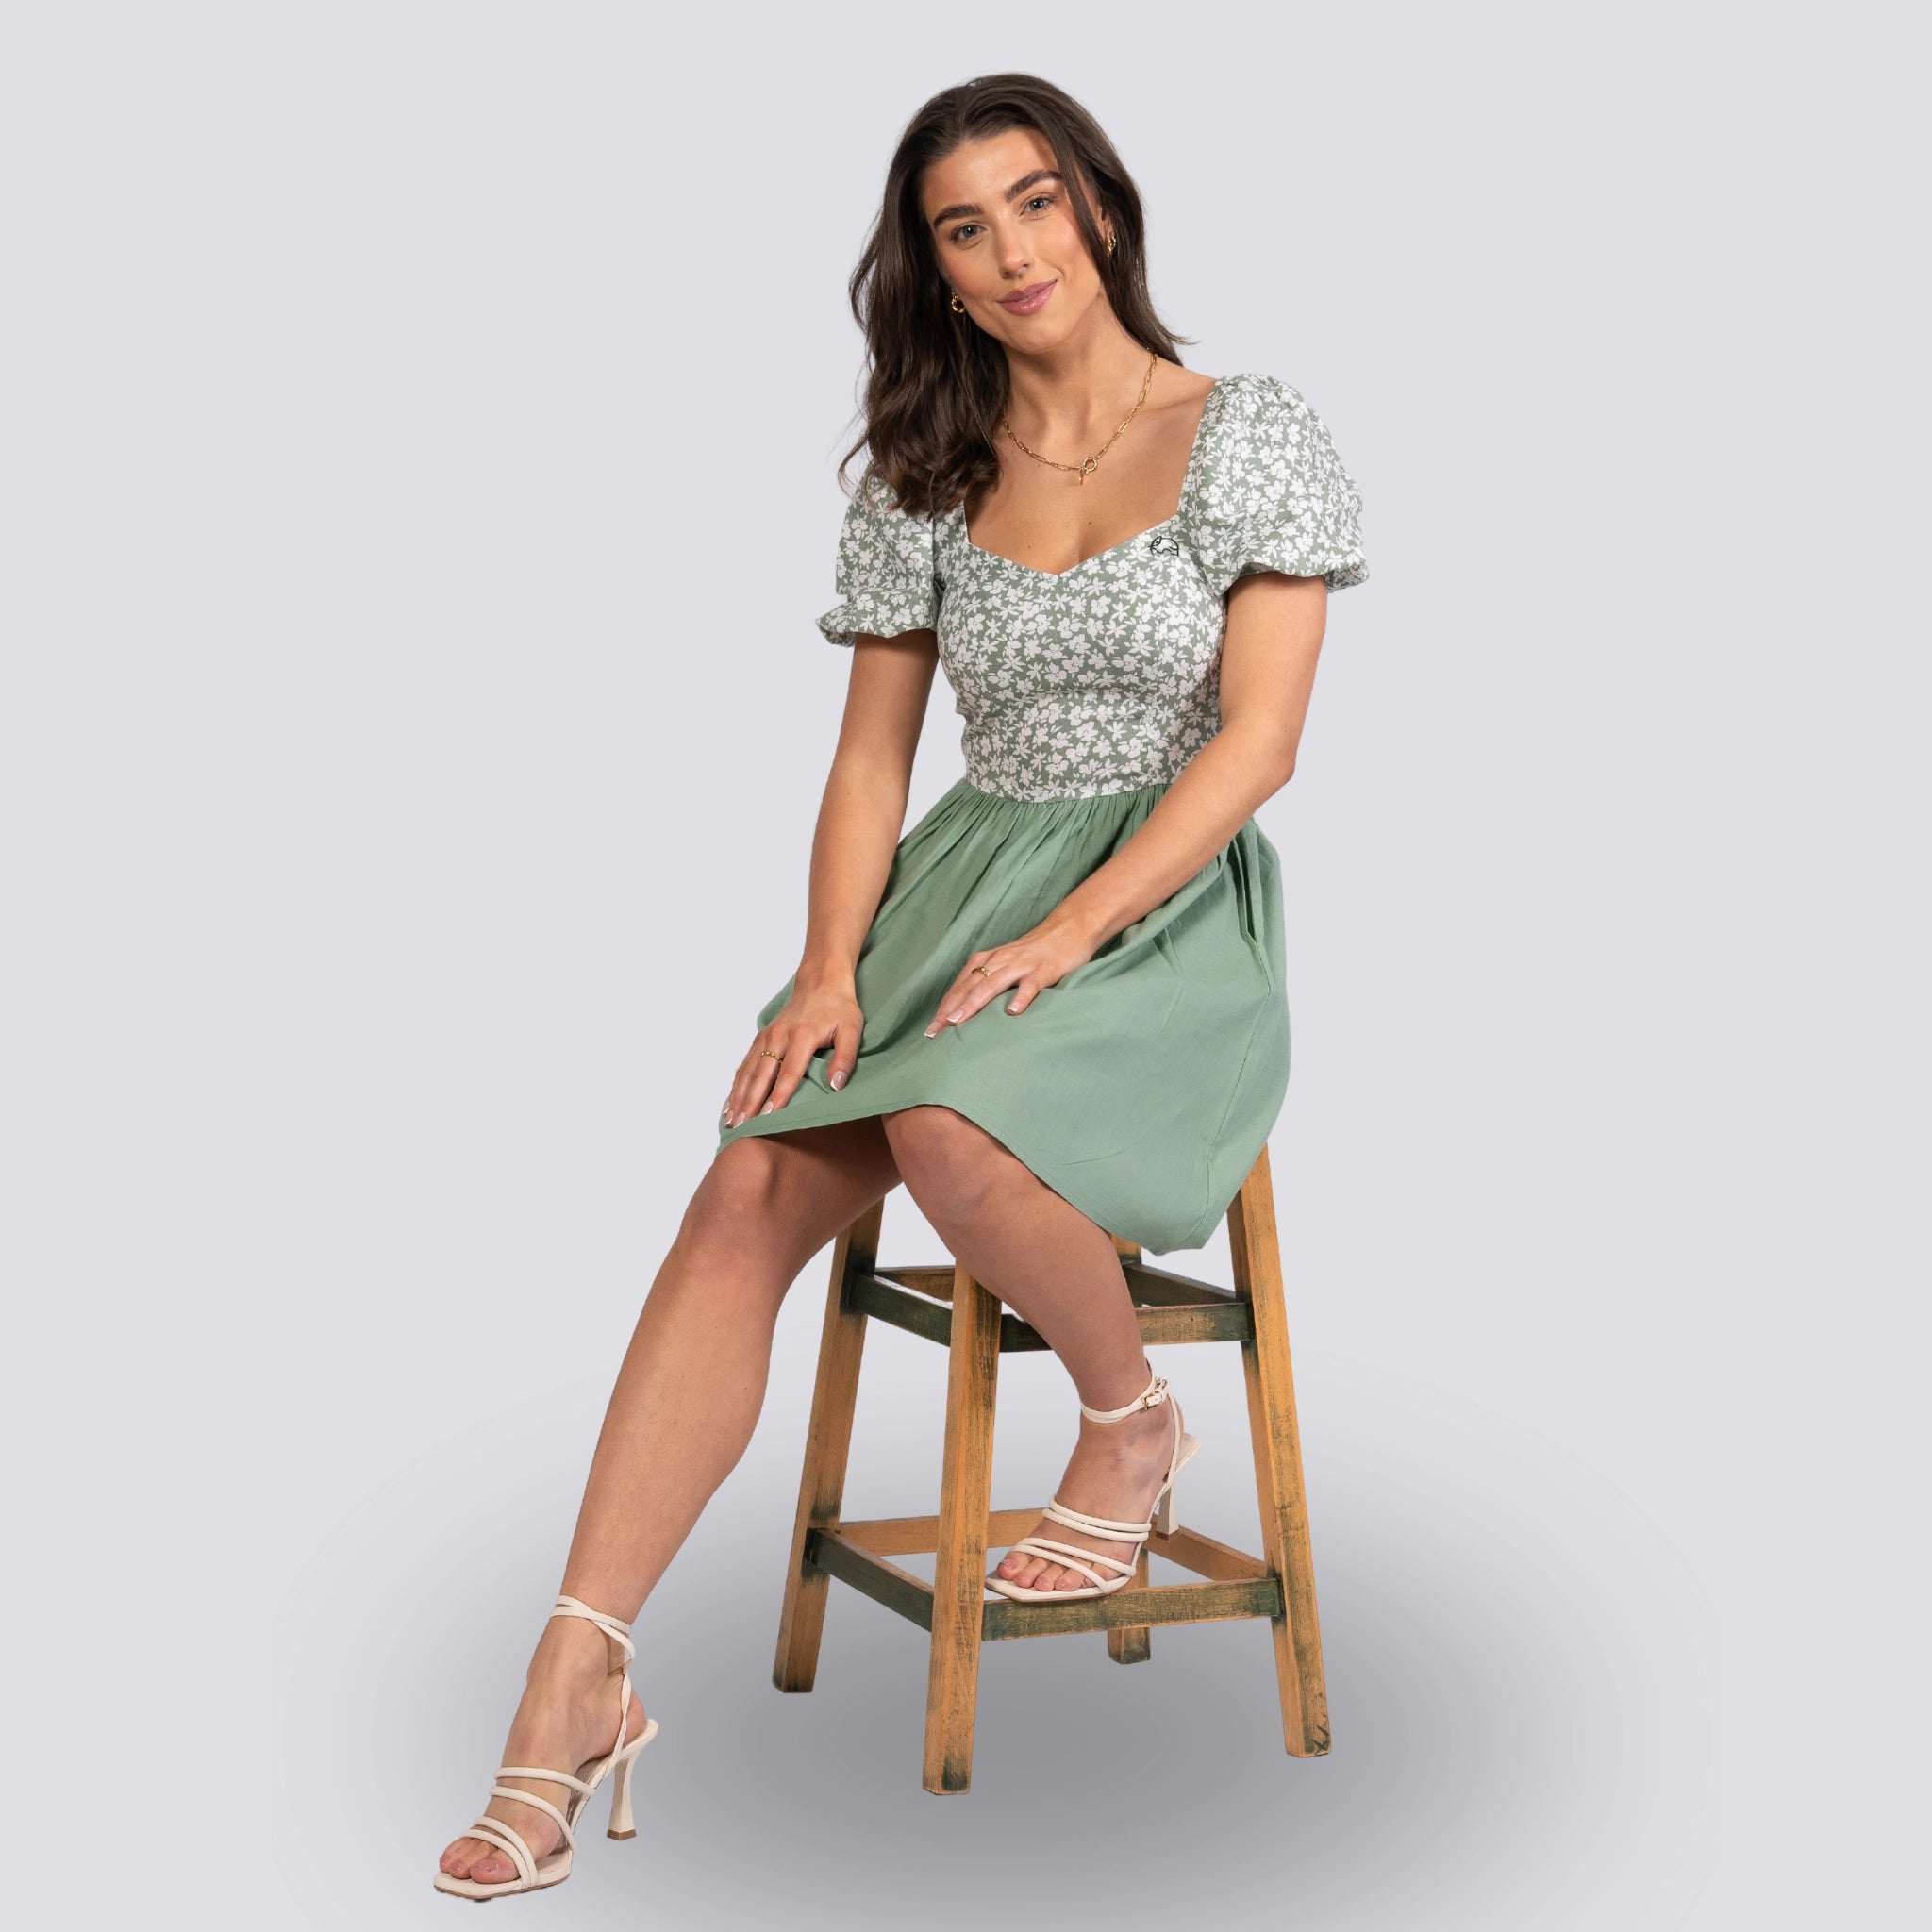 A woman in a Karee Sirocco Blooms green frock dress with a knee-length hemline sits on a wooden stool against a grey background, looking at the camera.